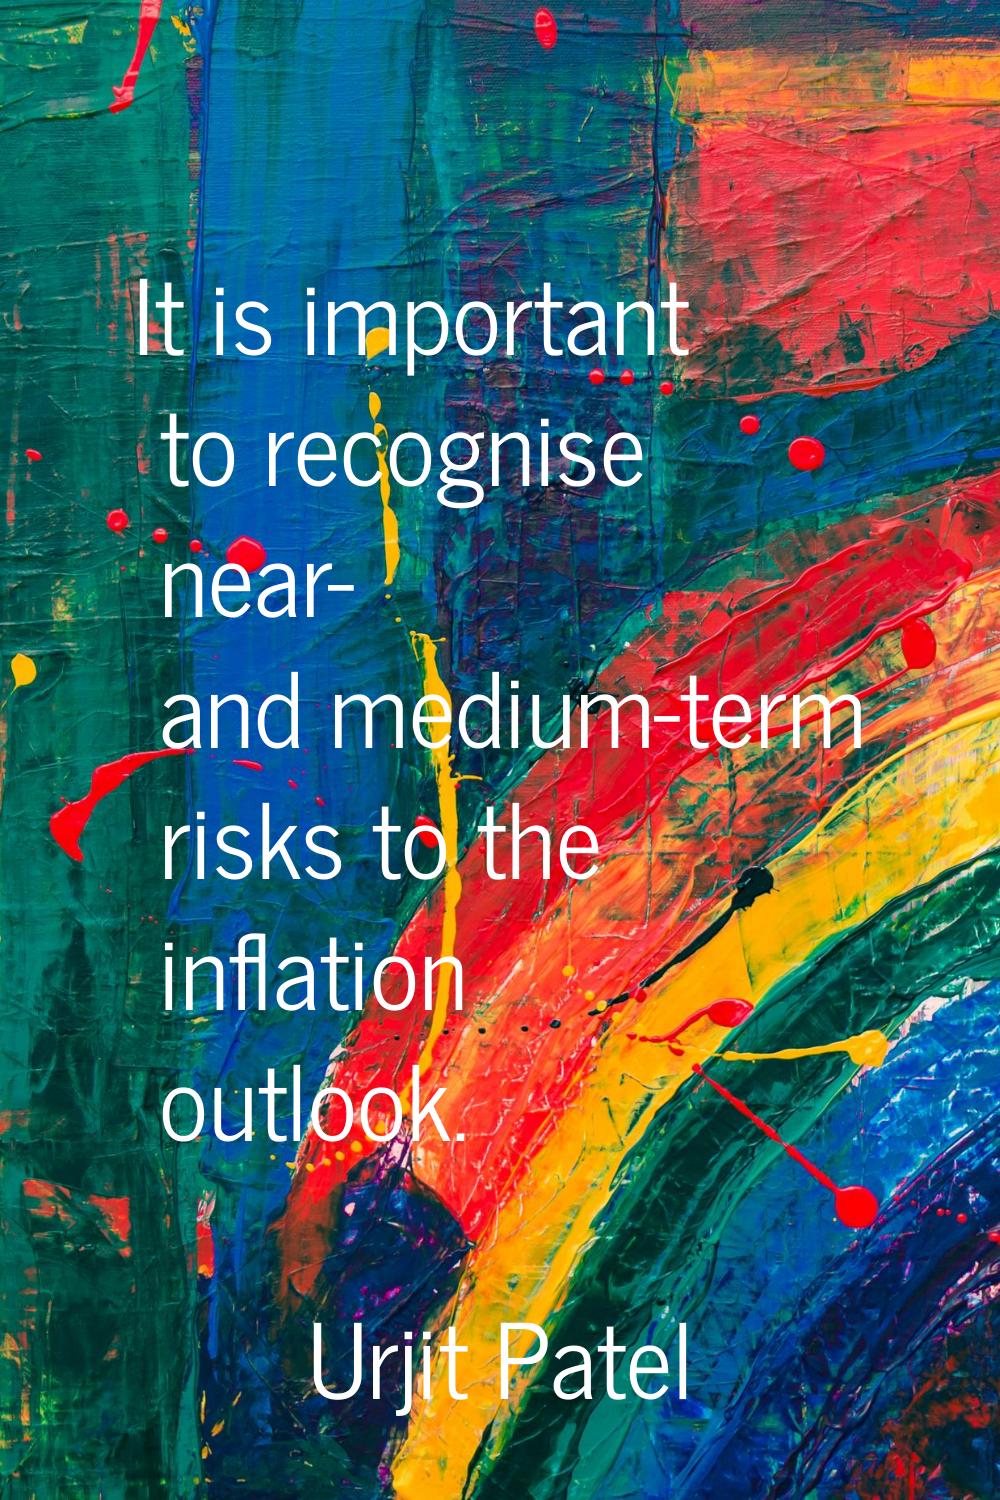 It is important to recognise near- and medium-term risks to the inflation outlook.